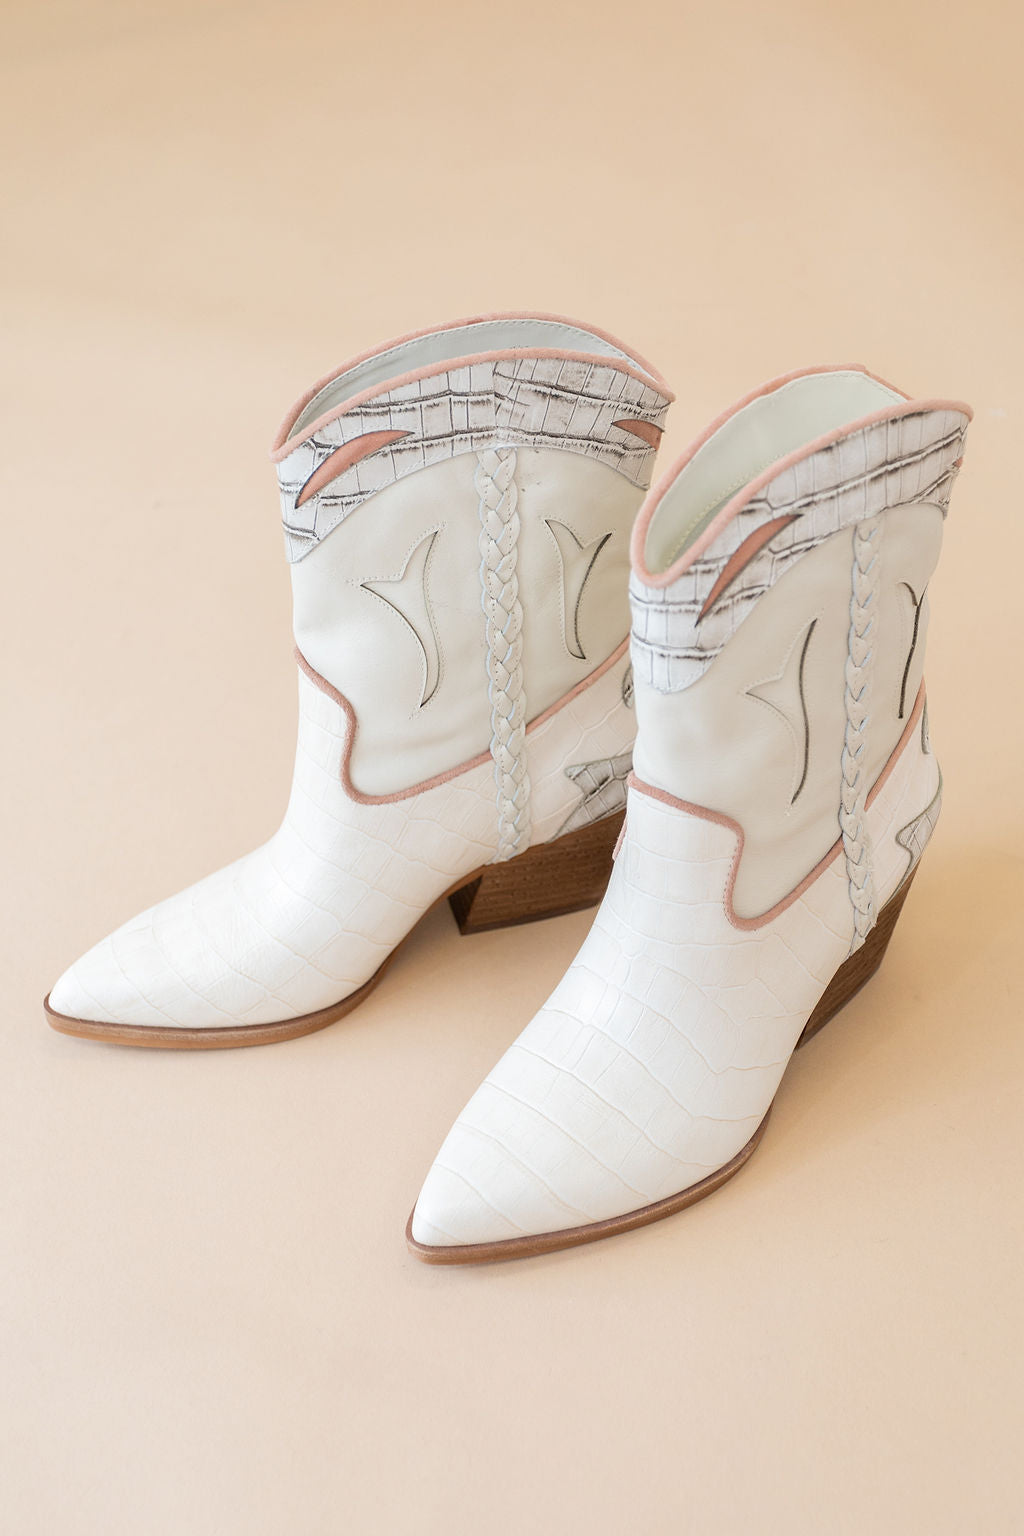 Dolce Vita | Loral Western Booties | Ivory Croc Print Leather - Poppy and Stella